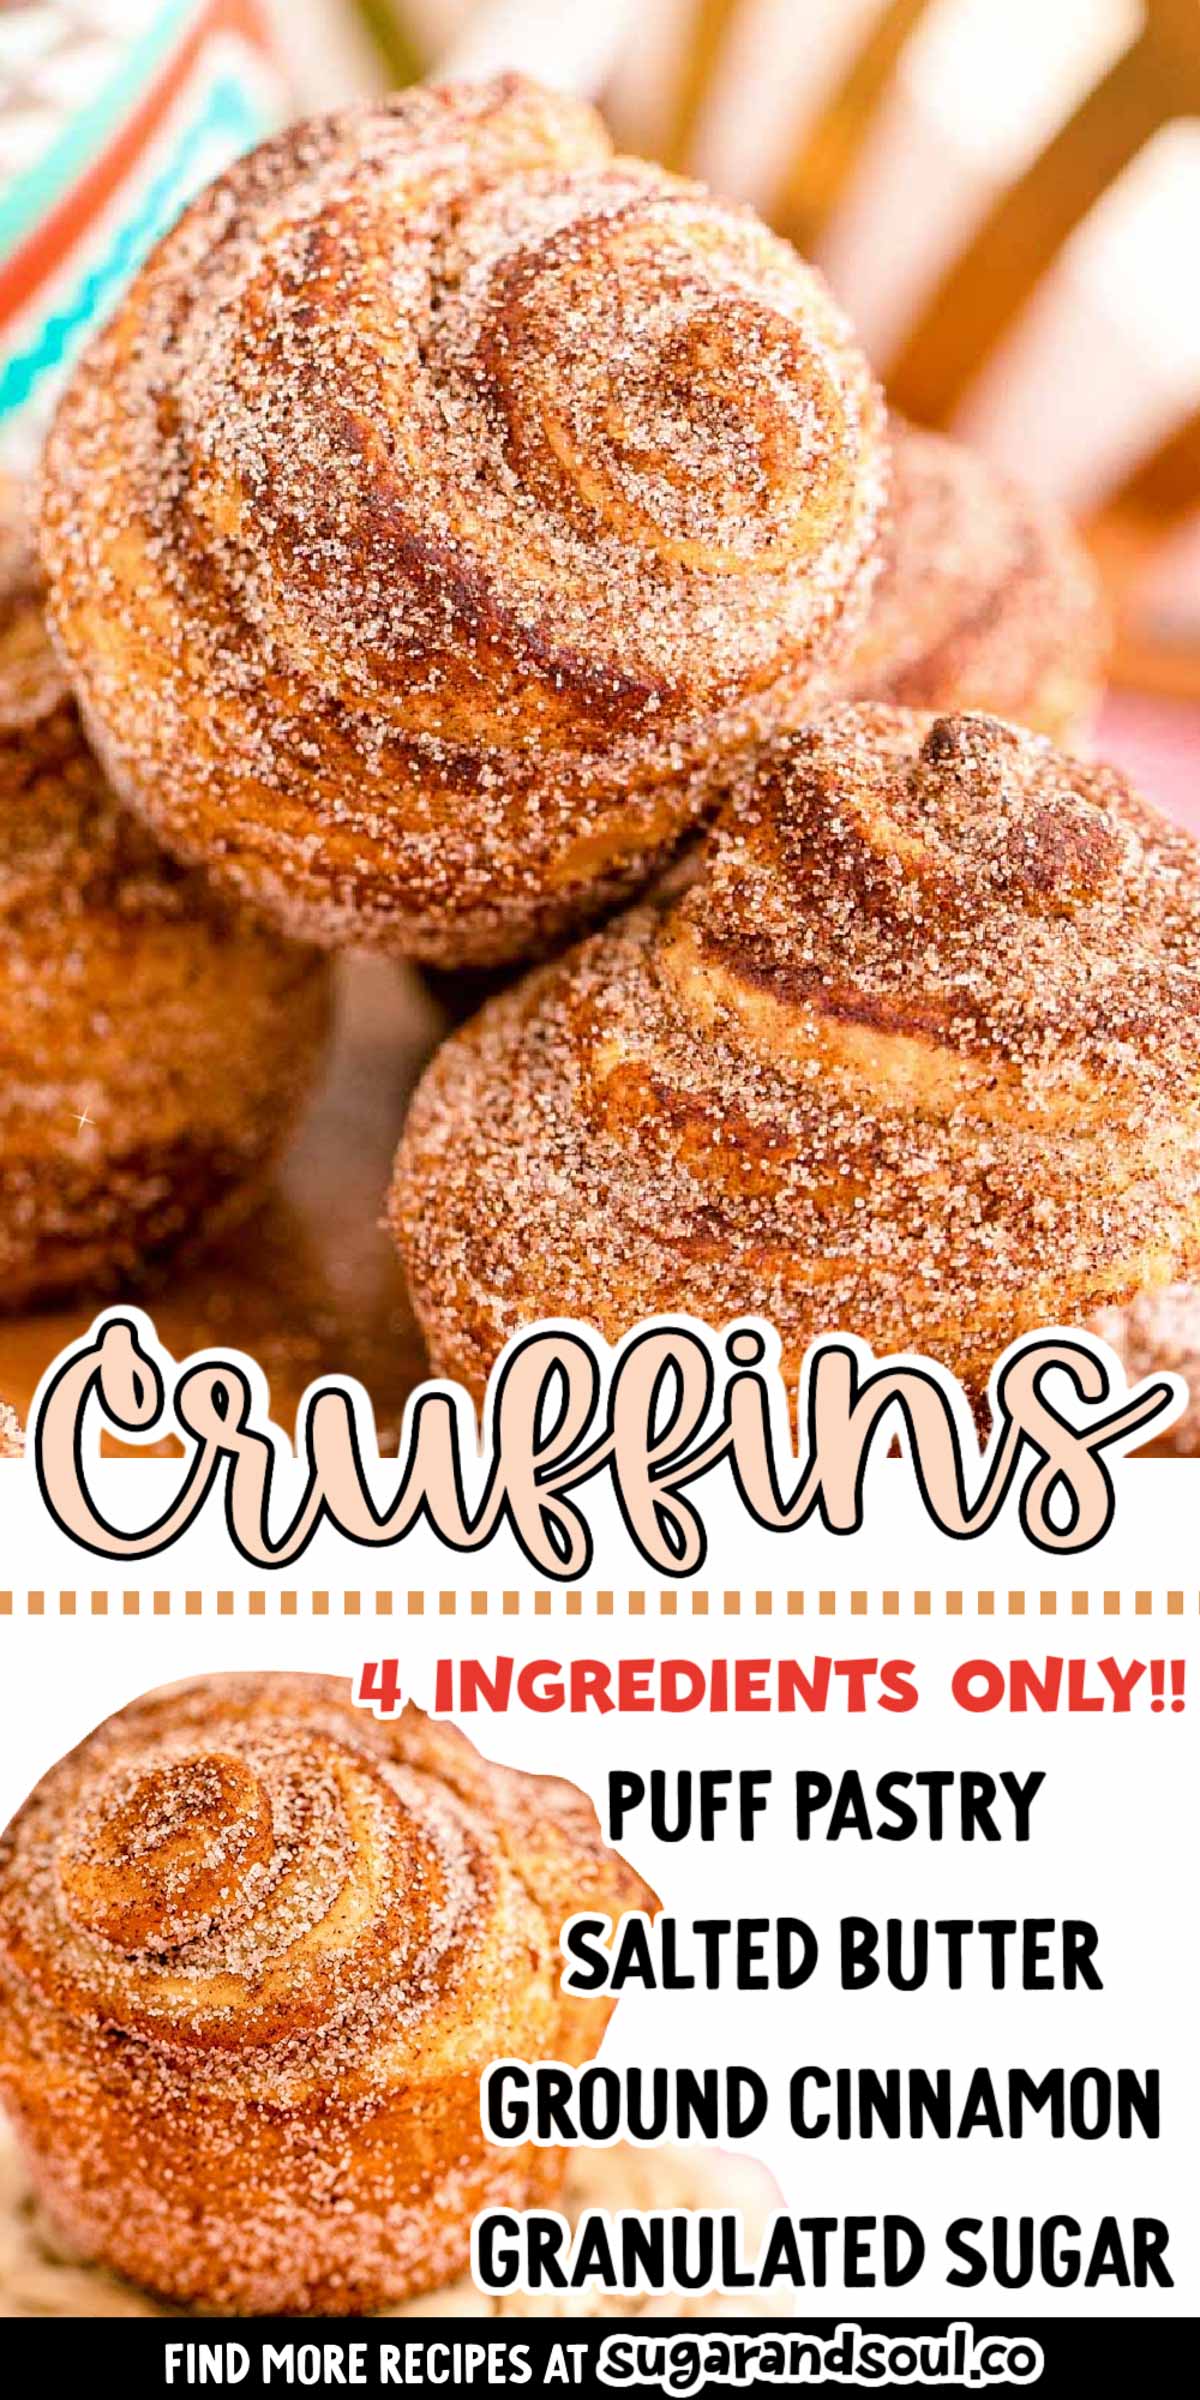 Cruffins are a deliciously flaky and buttery breakfast treat that's filled with a cinnamon-sugar mixture and baked until golden brown! Takes just 4 ingredients and 30 minutes to make a dozen! via @sugarandsoulco